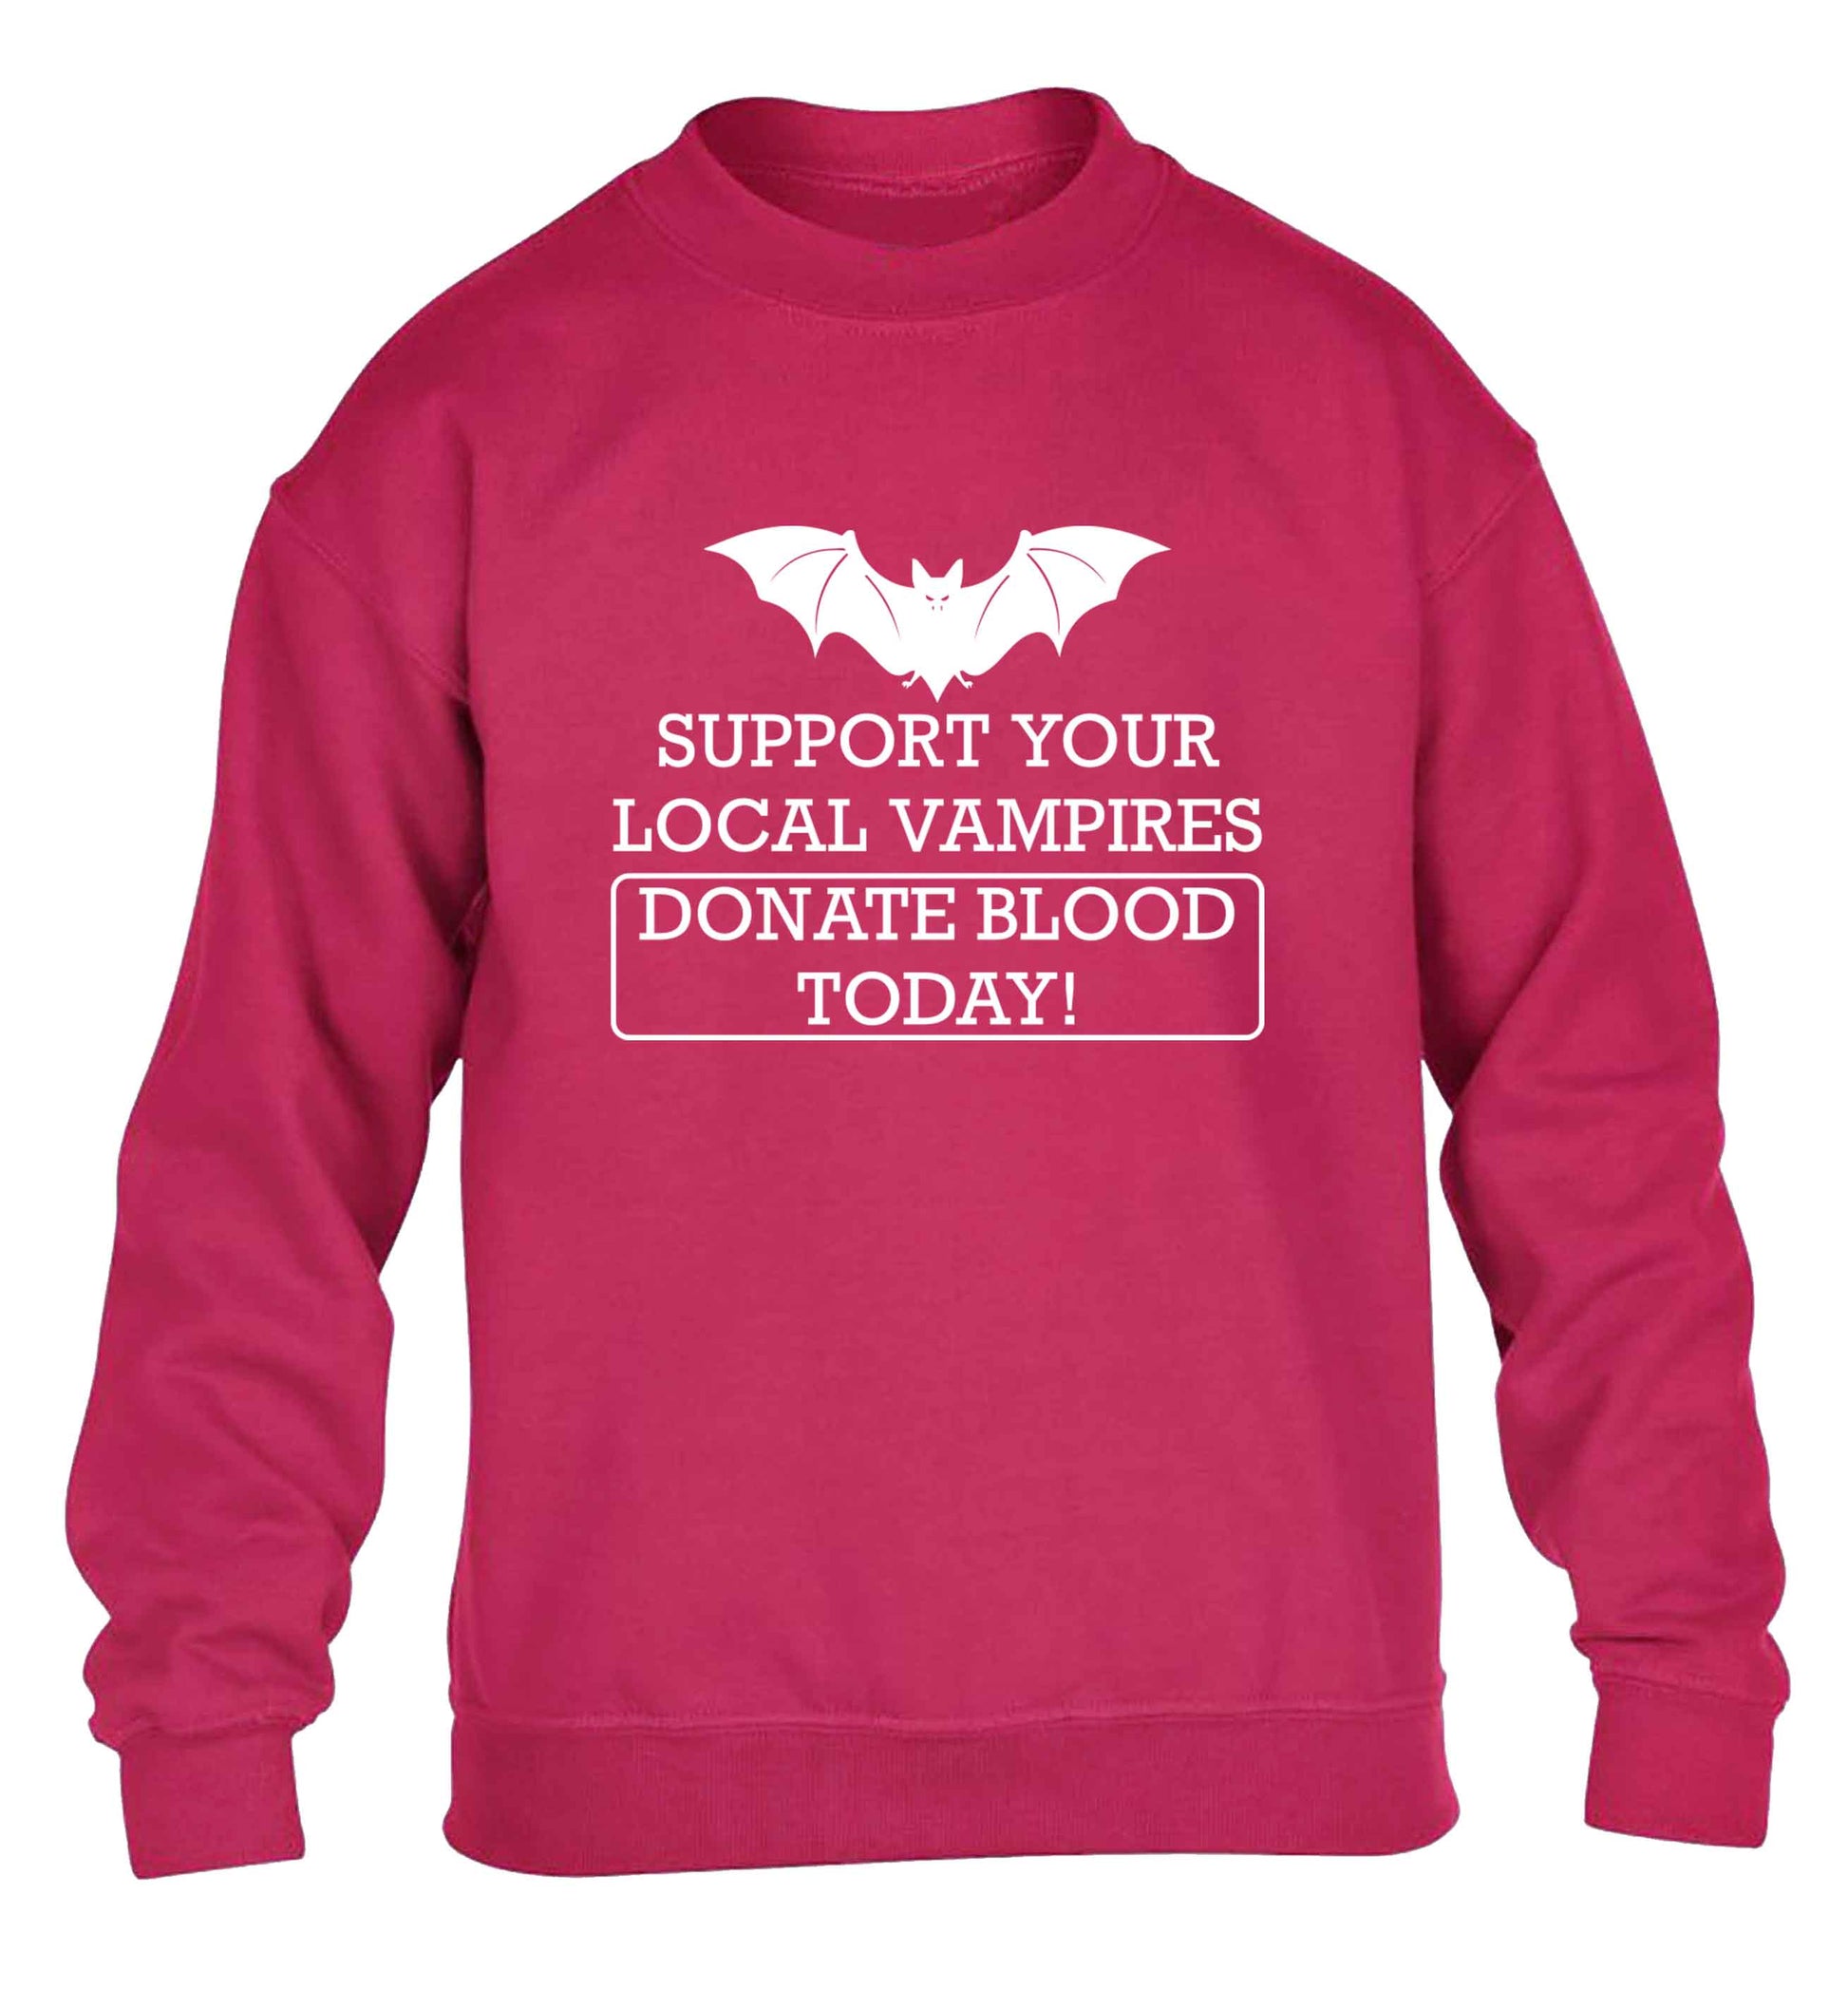 Support your local vampires donate blood today! children's pink sweater 12-13 Years